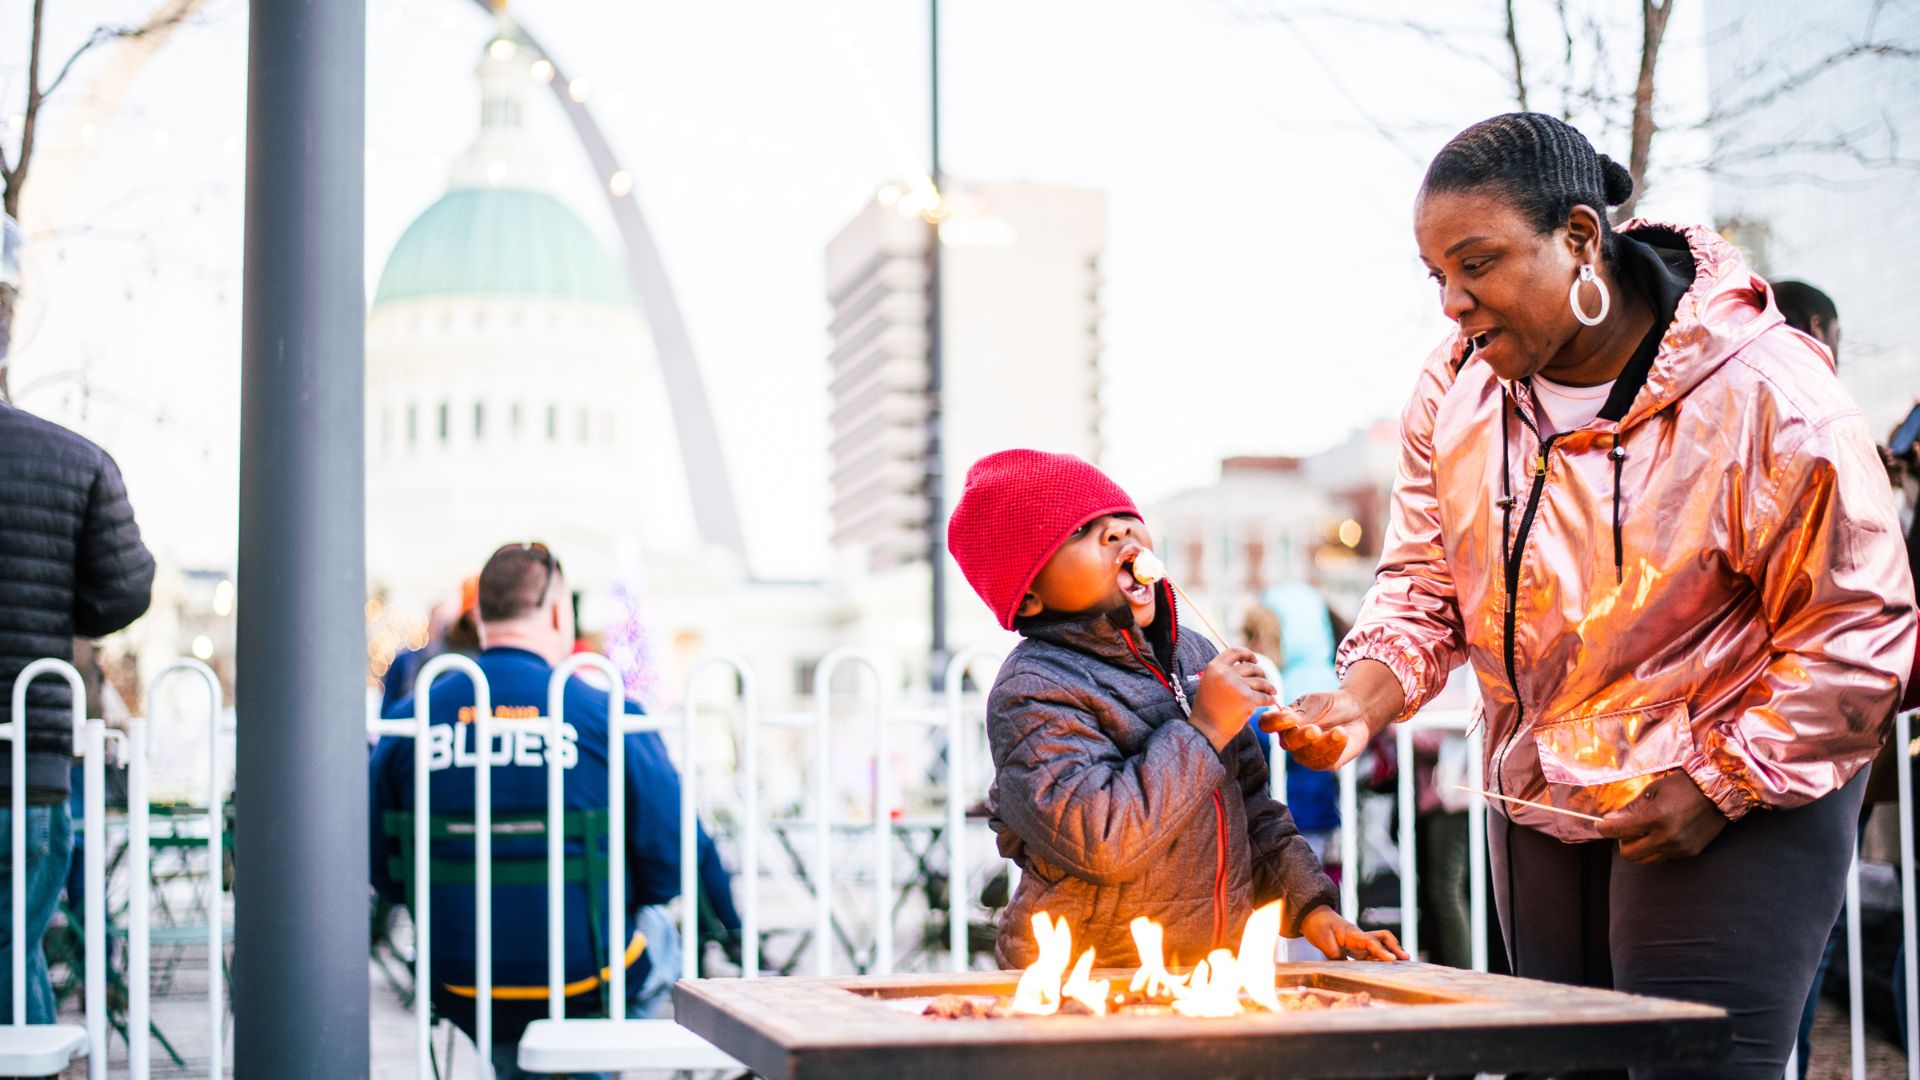 Enjoying holiday fun in St. Louis, a family roasts marshmallows during Winterfest.